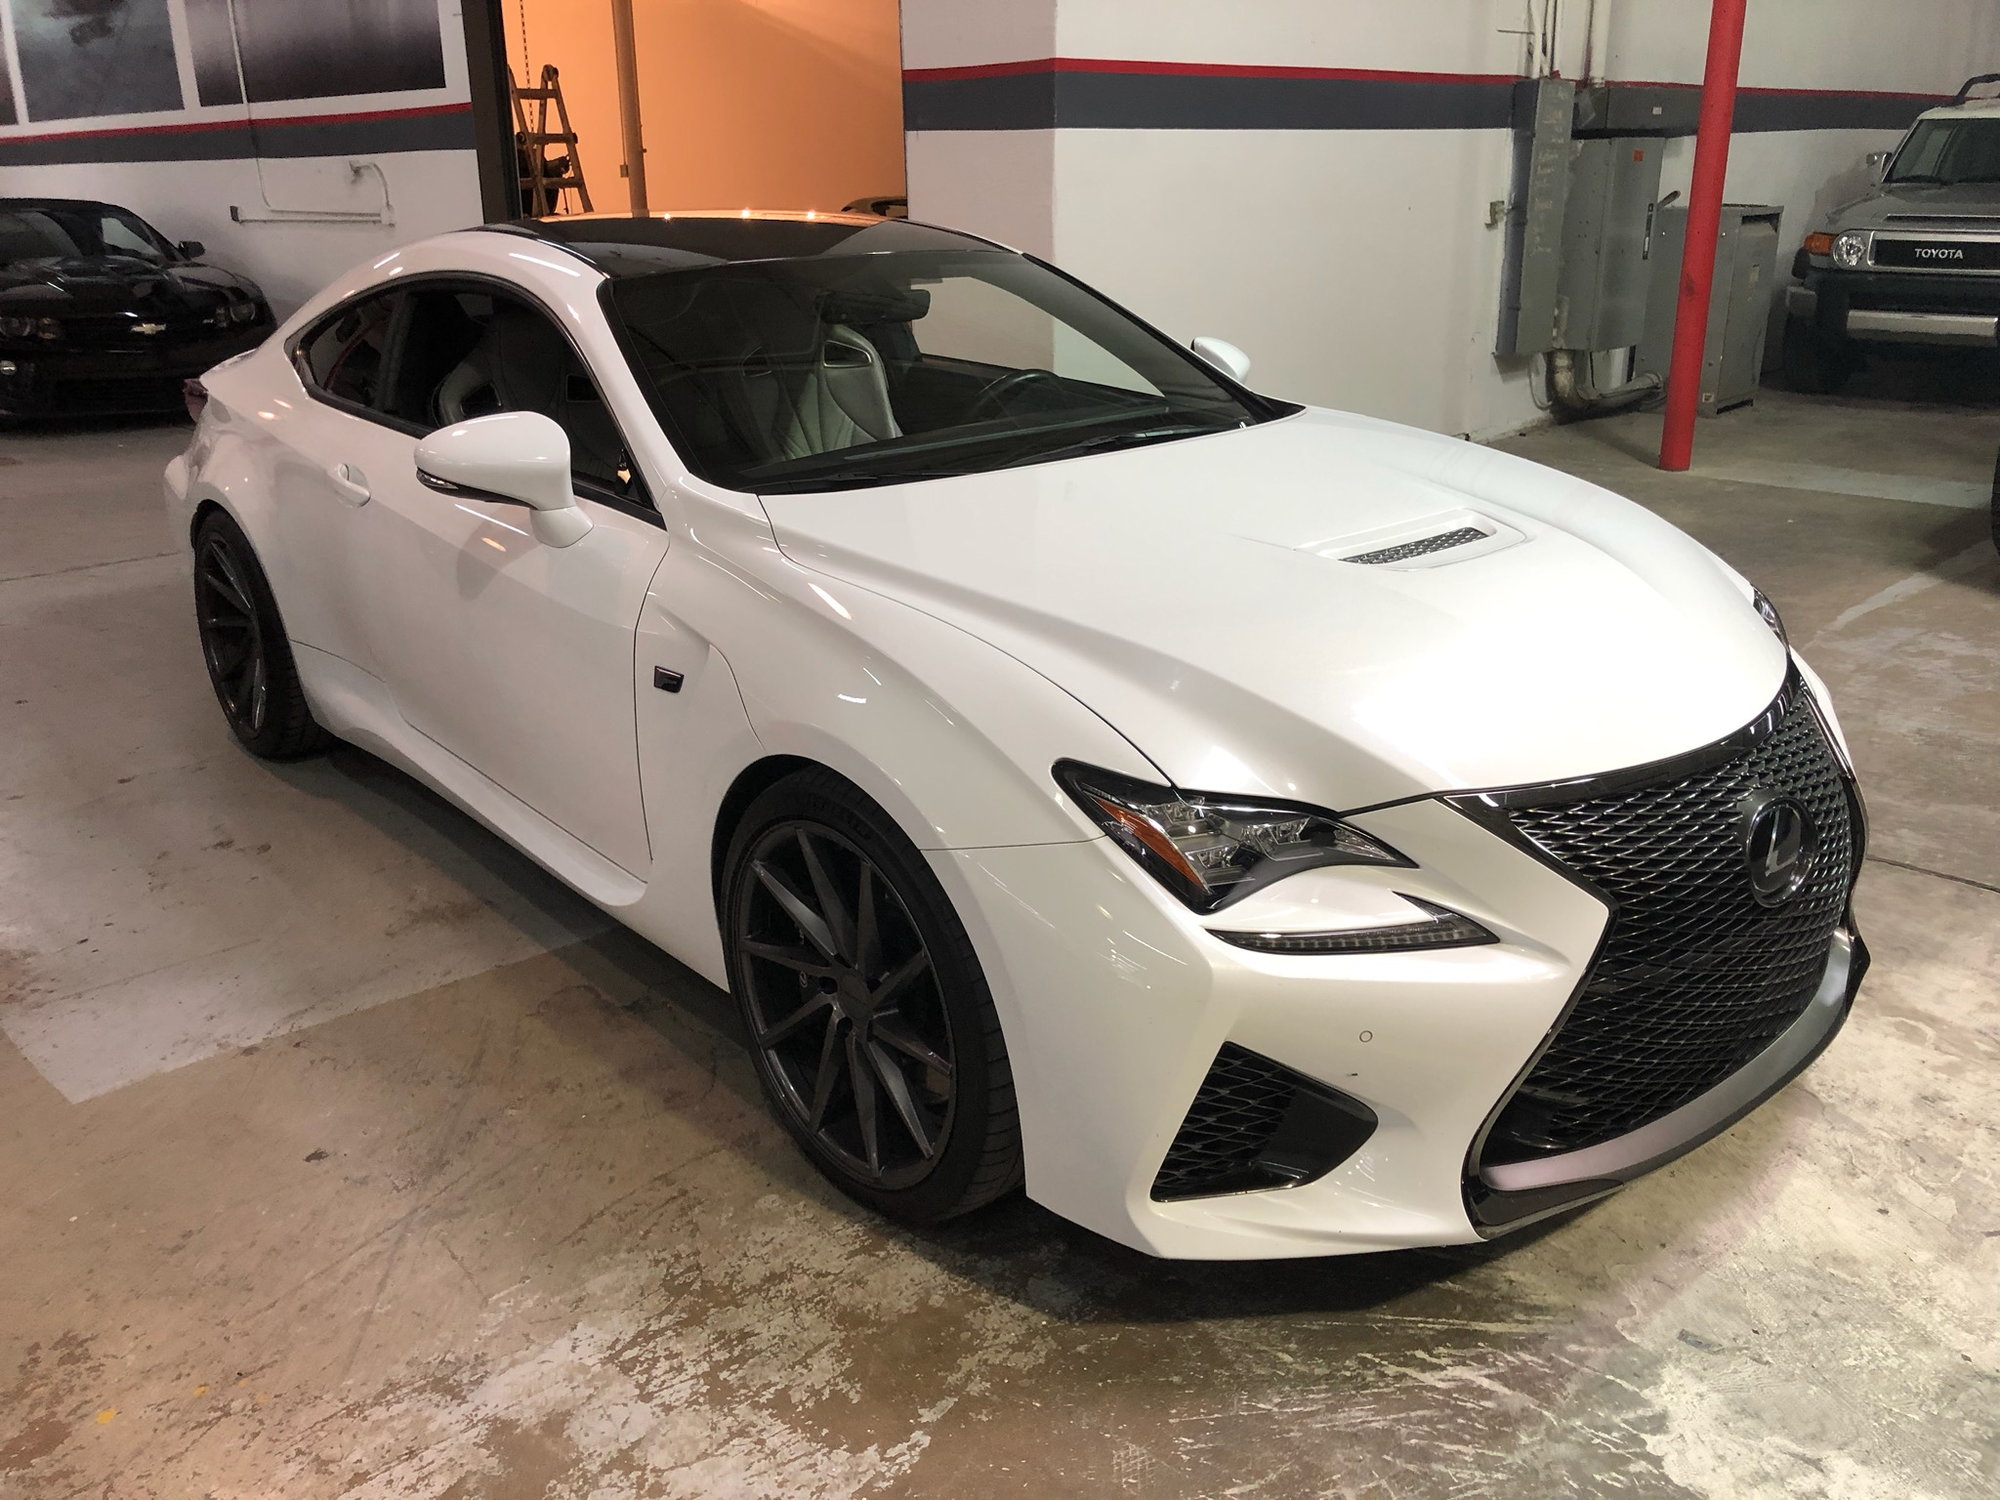 2015 Lexus RC F - 2015 Lexus RCF, Ultra white w/white leather, TVD & Carbon Package, 20" Vossen wheels - Used - VIN JTHHP5BC3F5003004 - 36,000 Miles - 8 cyl - 2WD - Automatic - Coupe - White - Dallas, TX 75070, United States